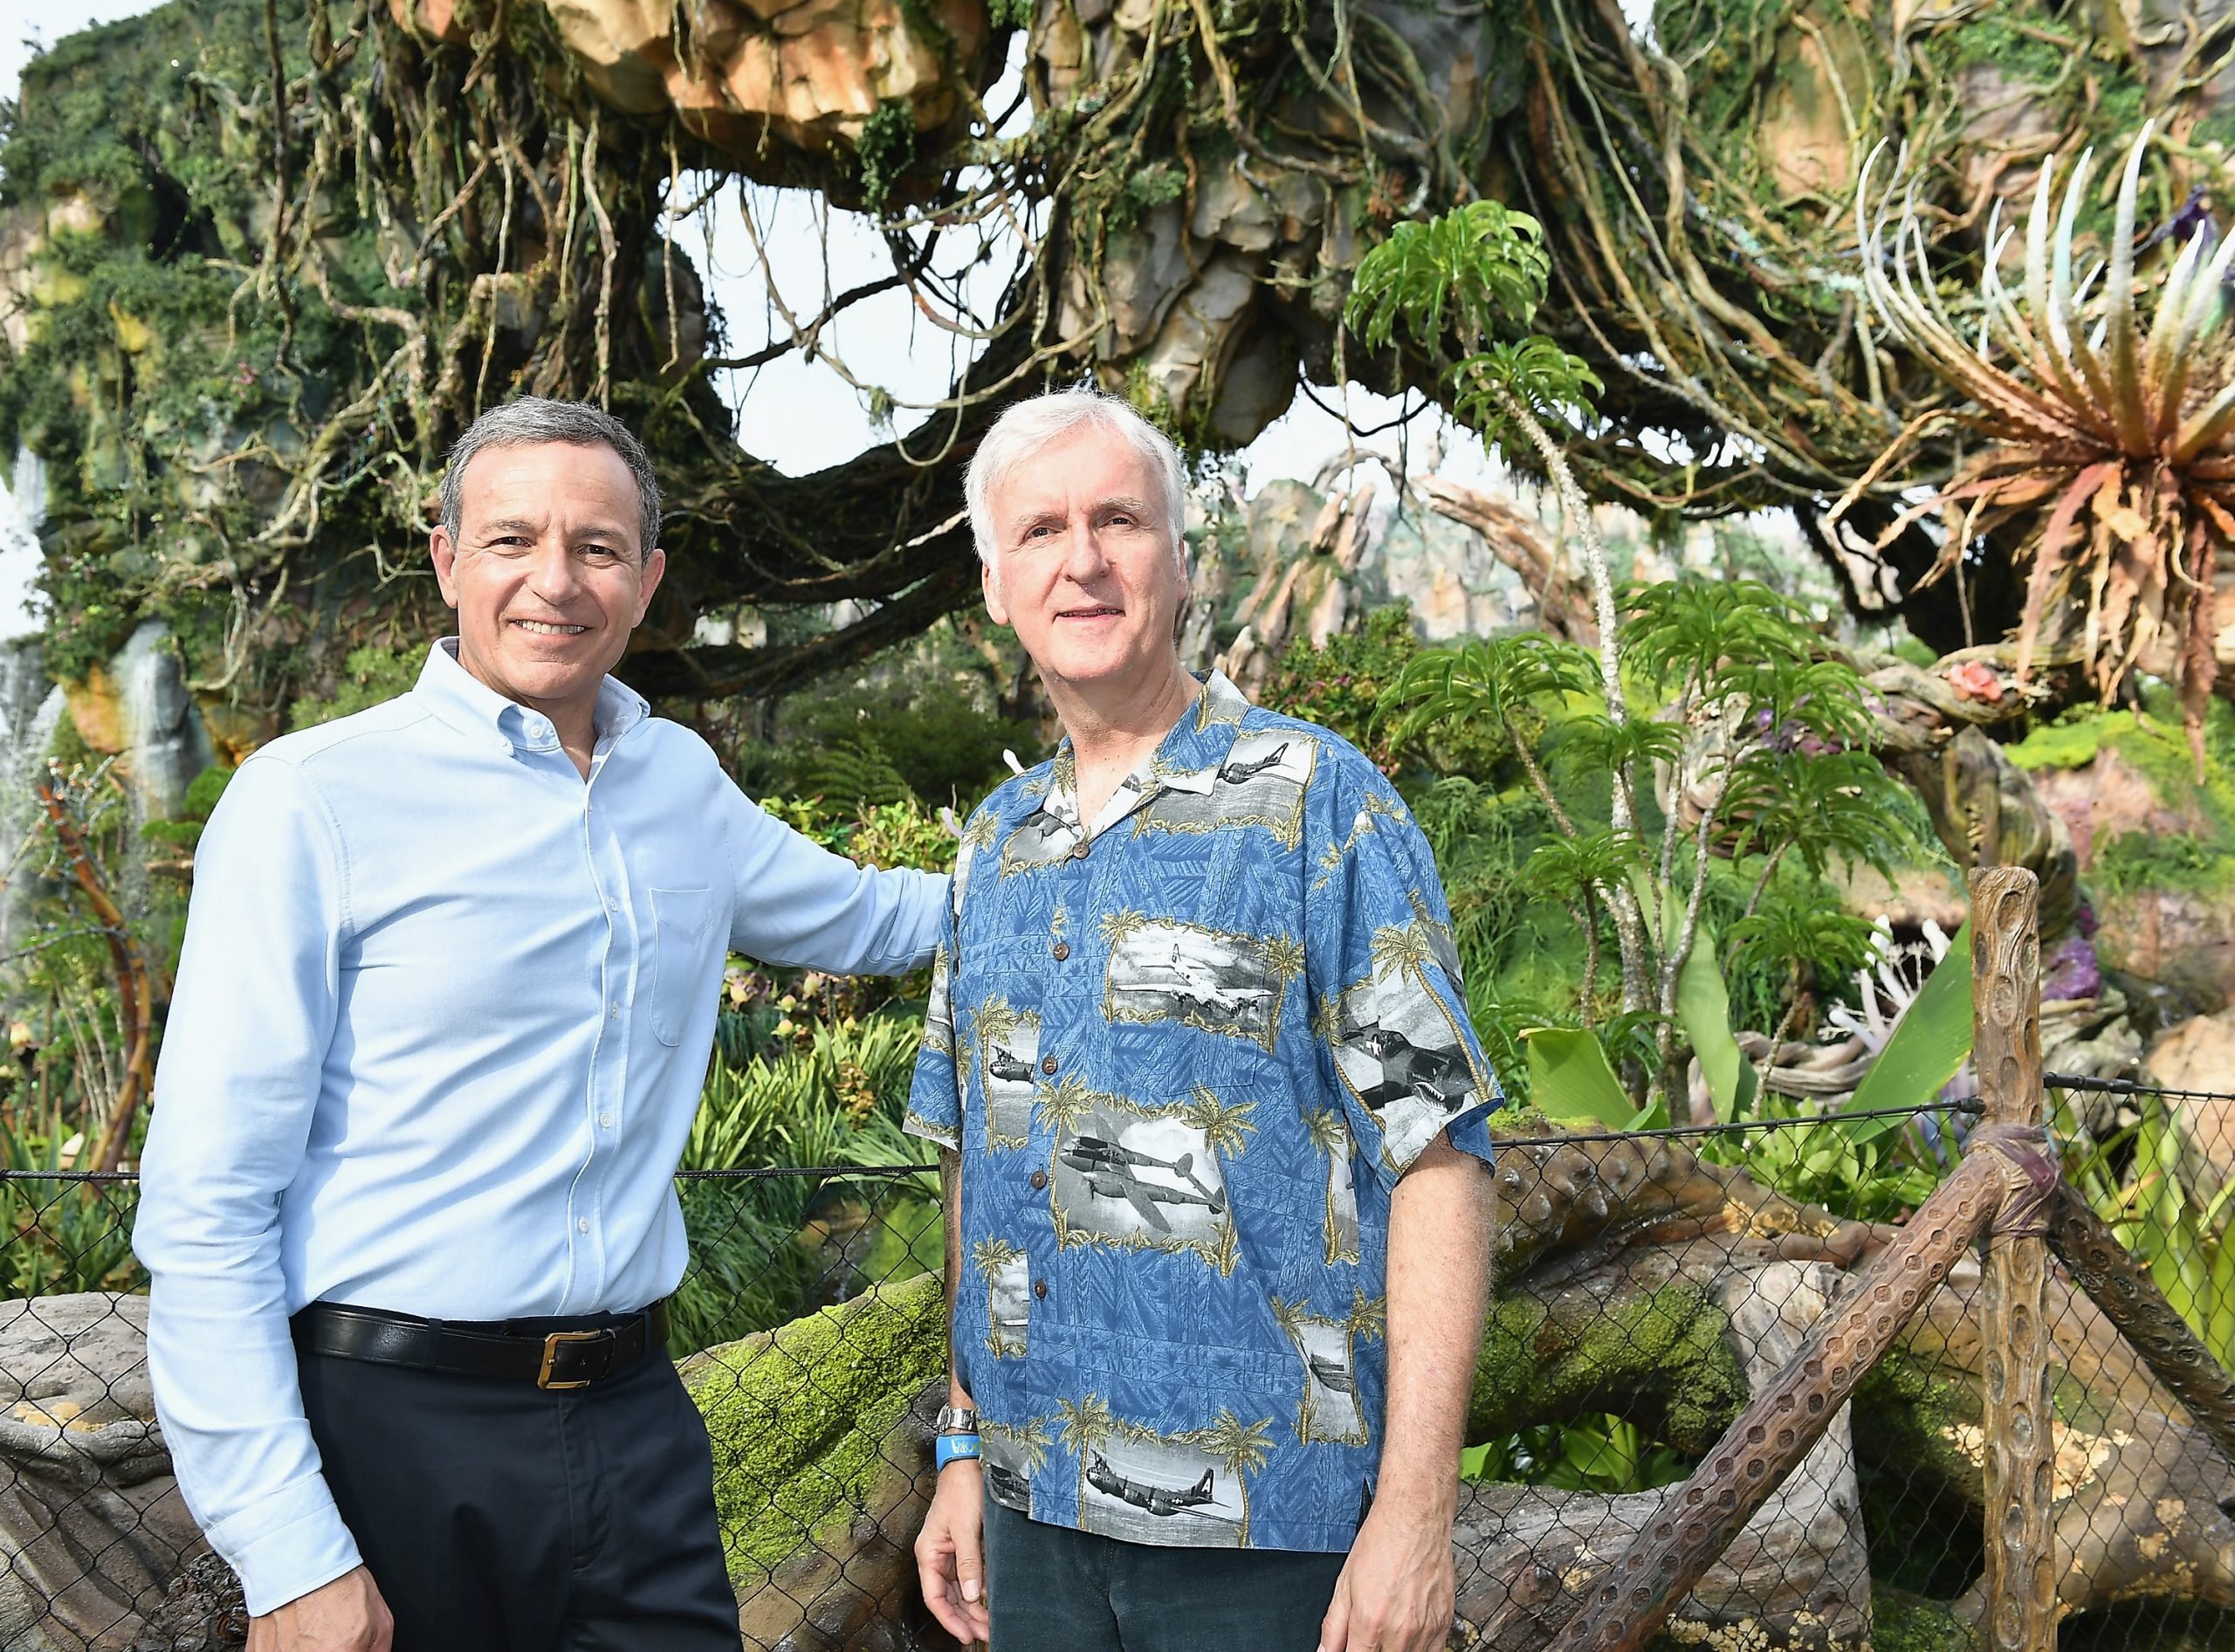 James Cameron Might Not Direct Avatar 4 And 5 Himself – Exclusive